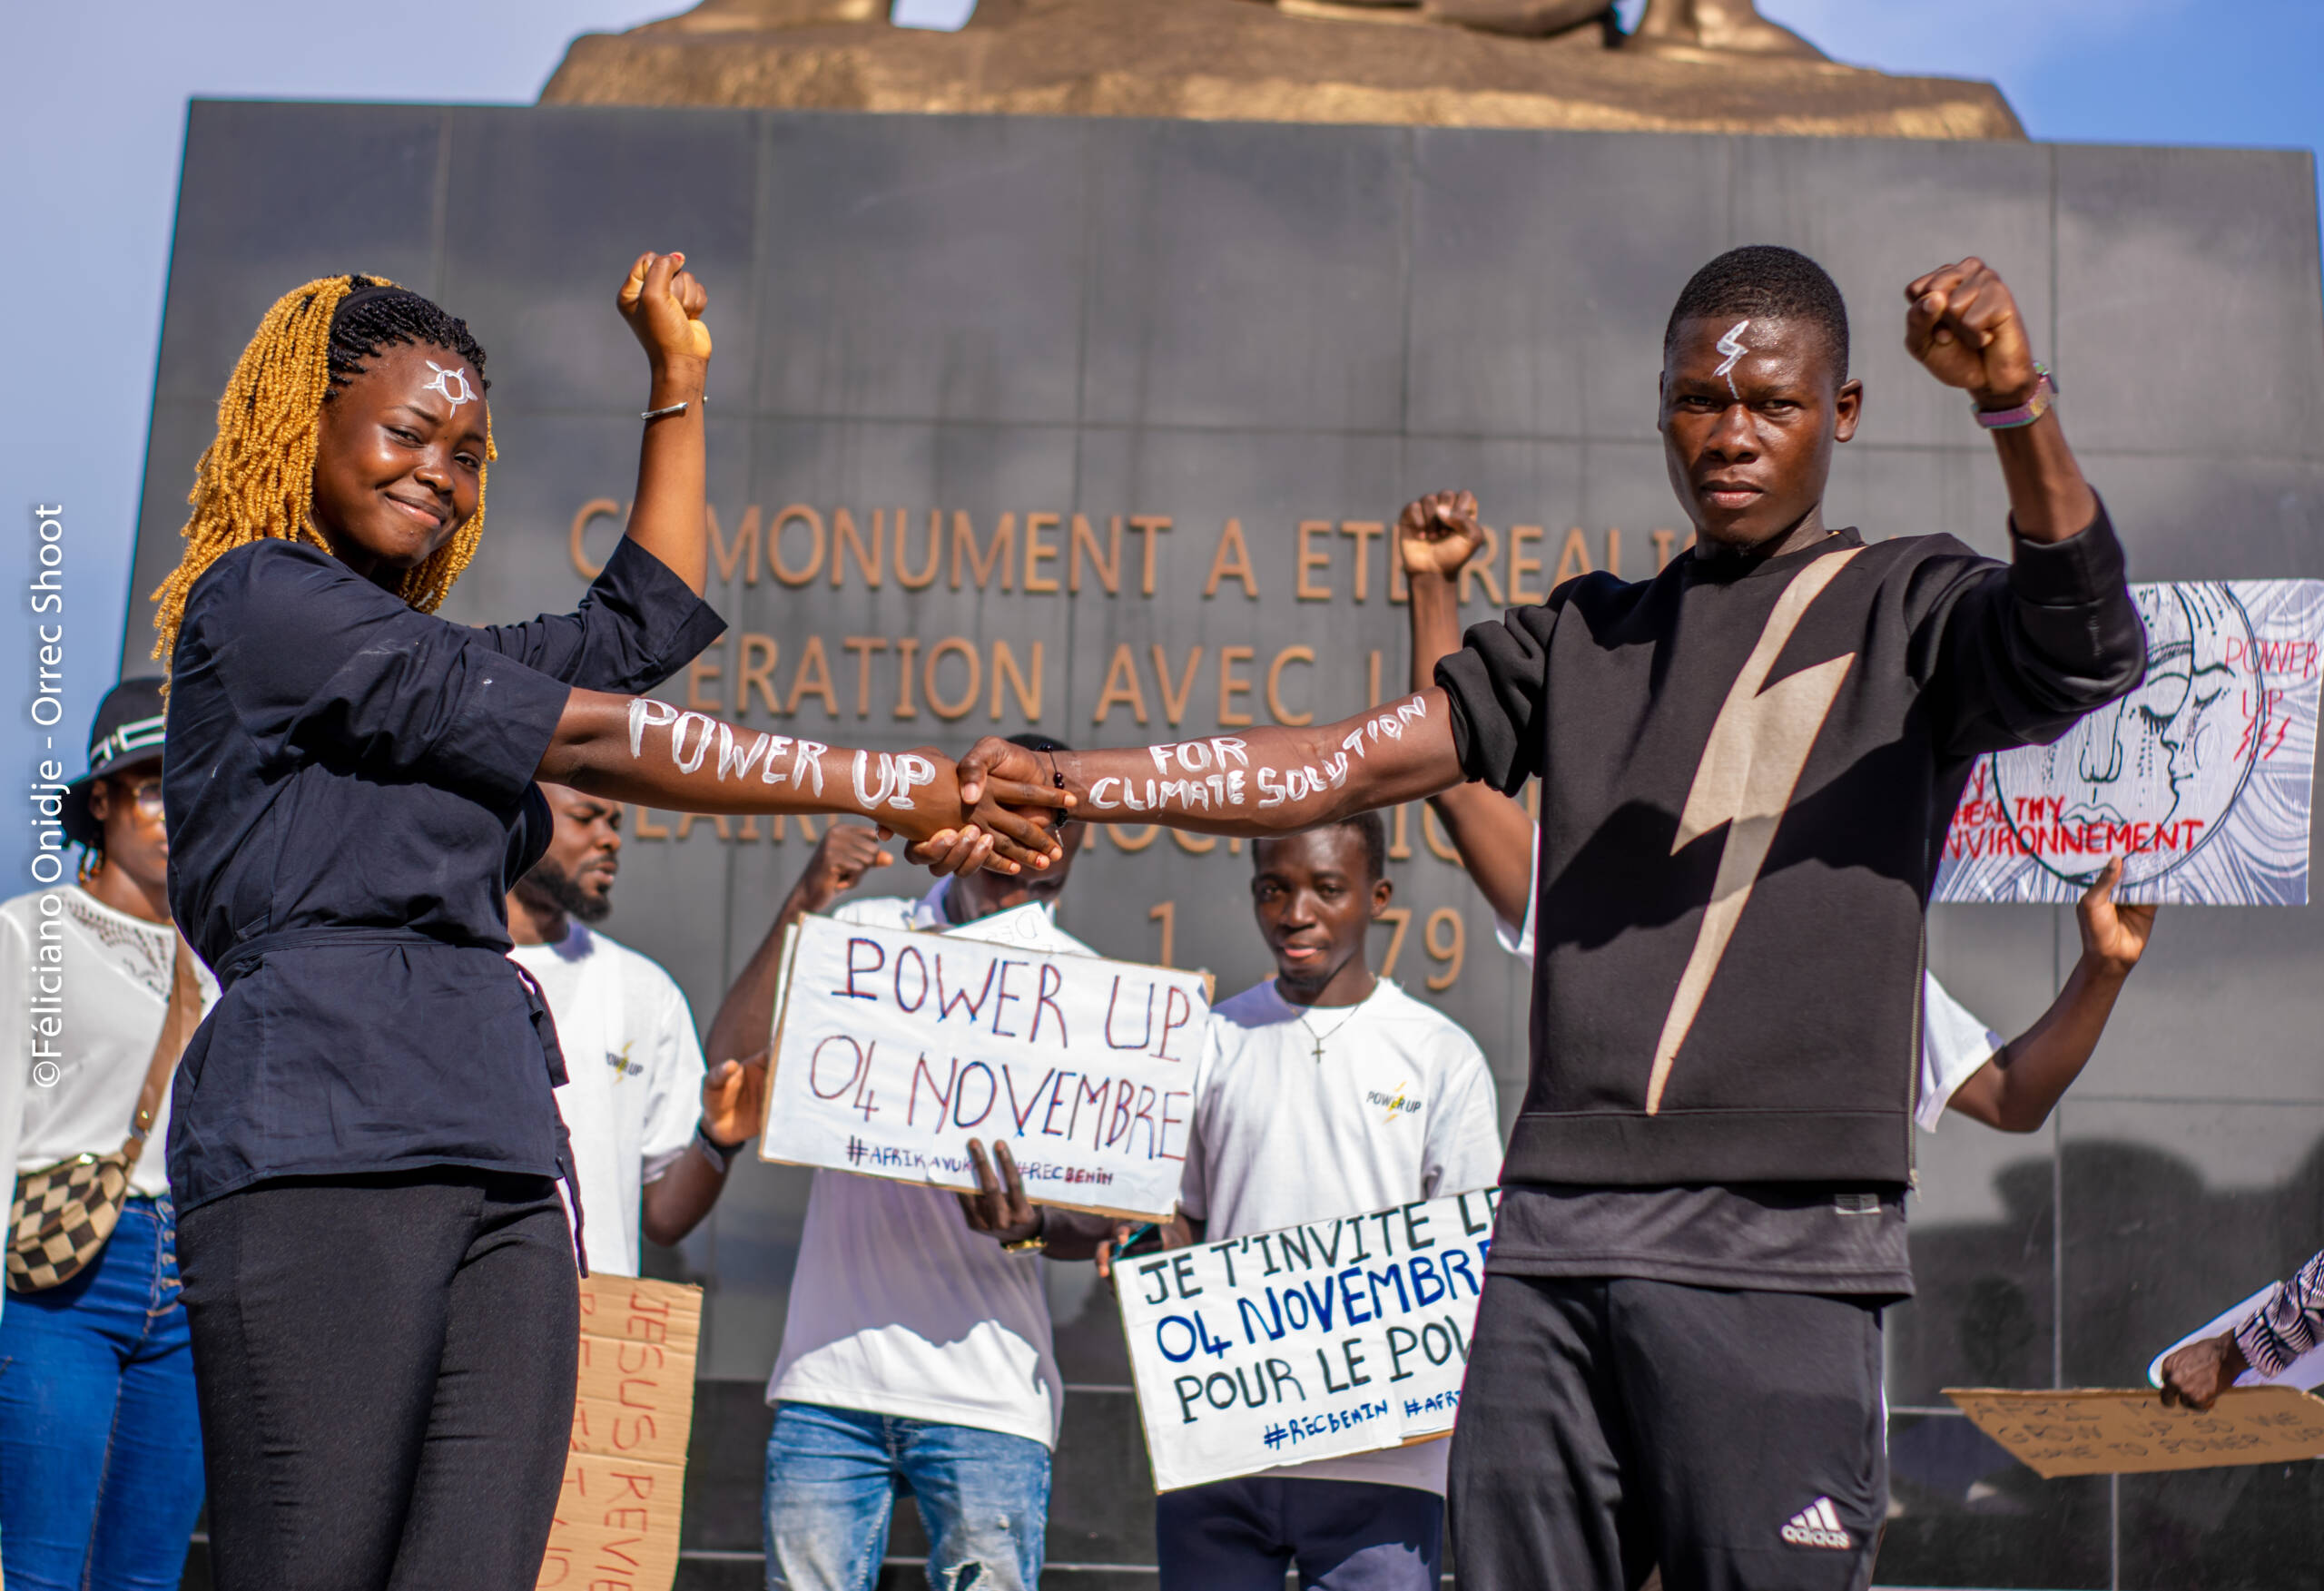 Cotonou, Benin, October 9: in preparation for Power Up, activists raised awareness, recruited supporters and tapped into their creativity to prepare for Power Up actions. Photo credit: 350 Africa.jpg